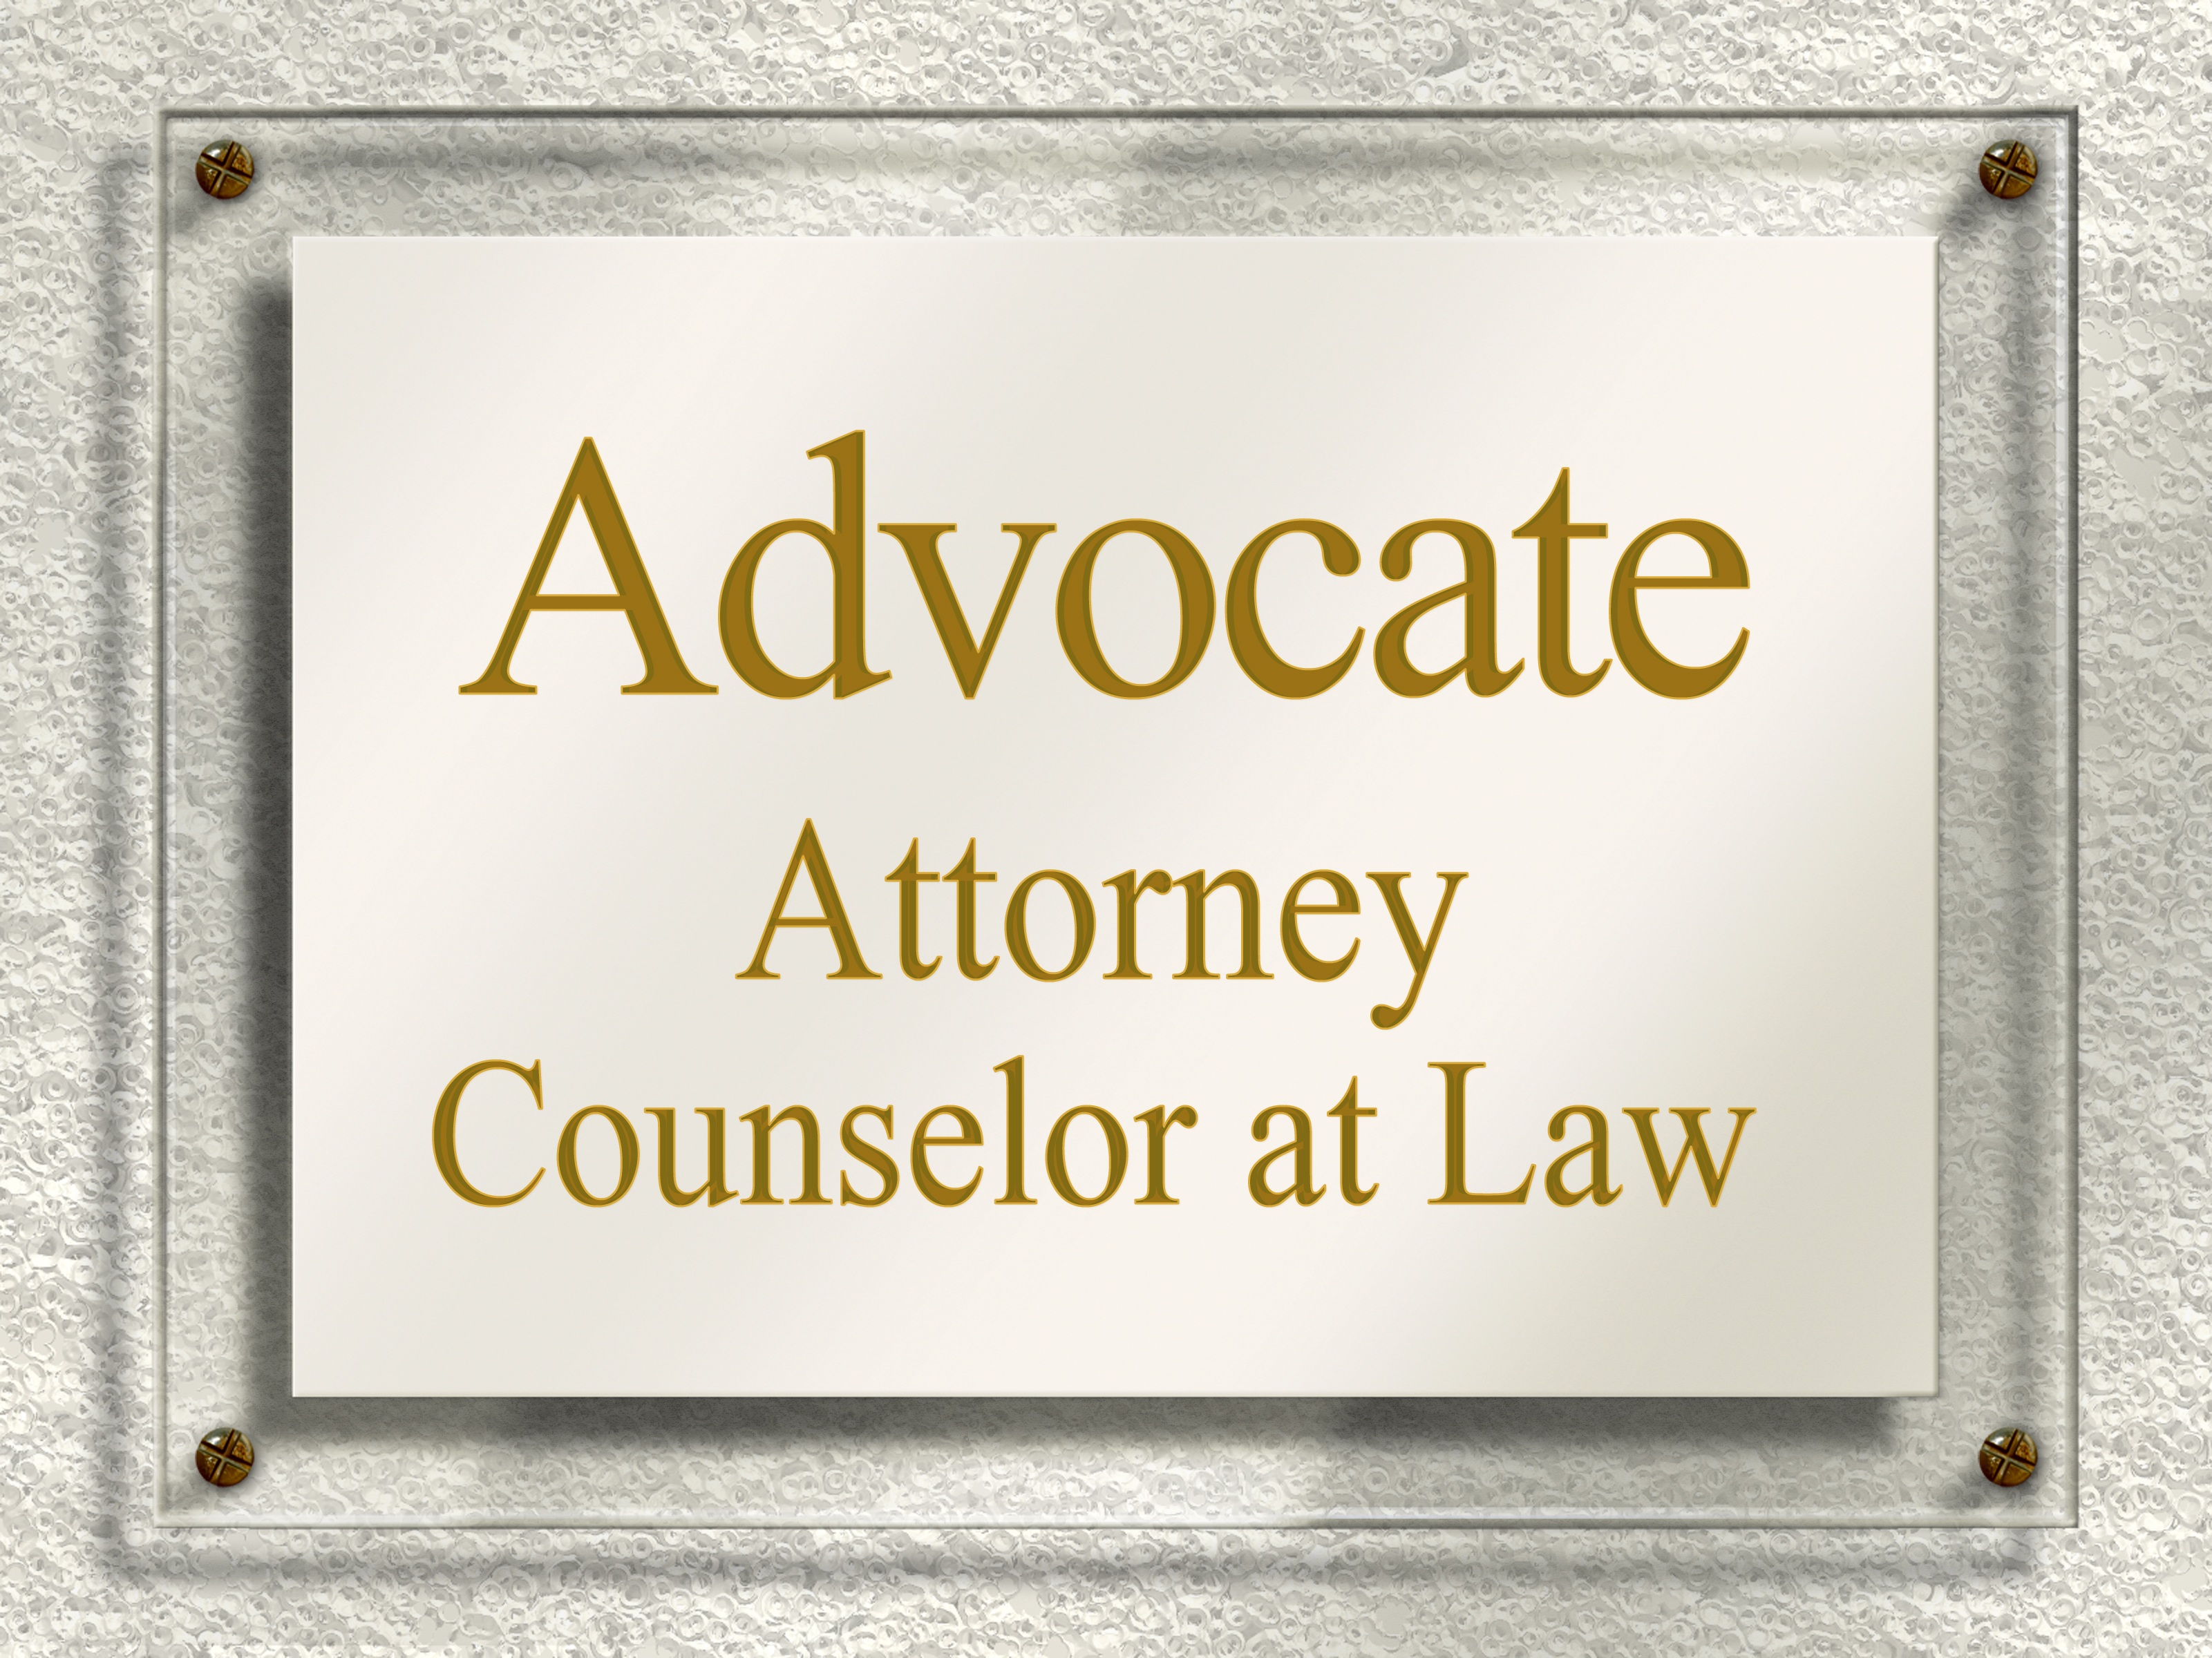 Advocate Attorney Counselor At Law signgage, door sign, nameplate